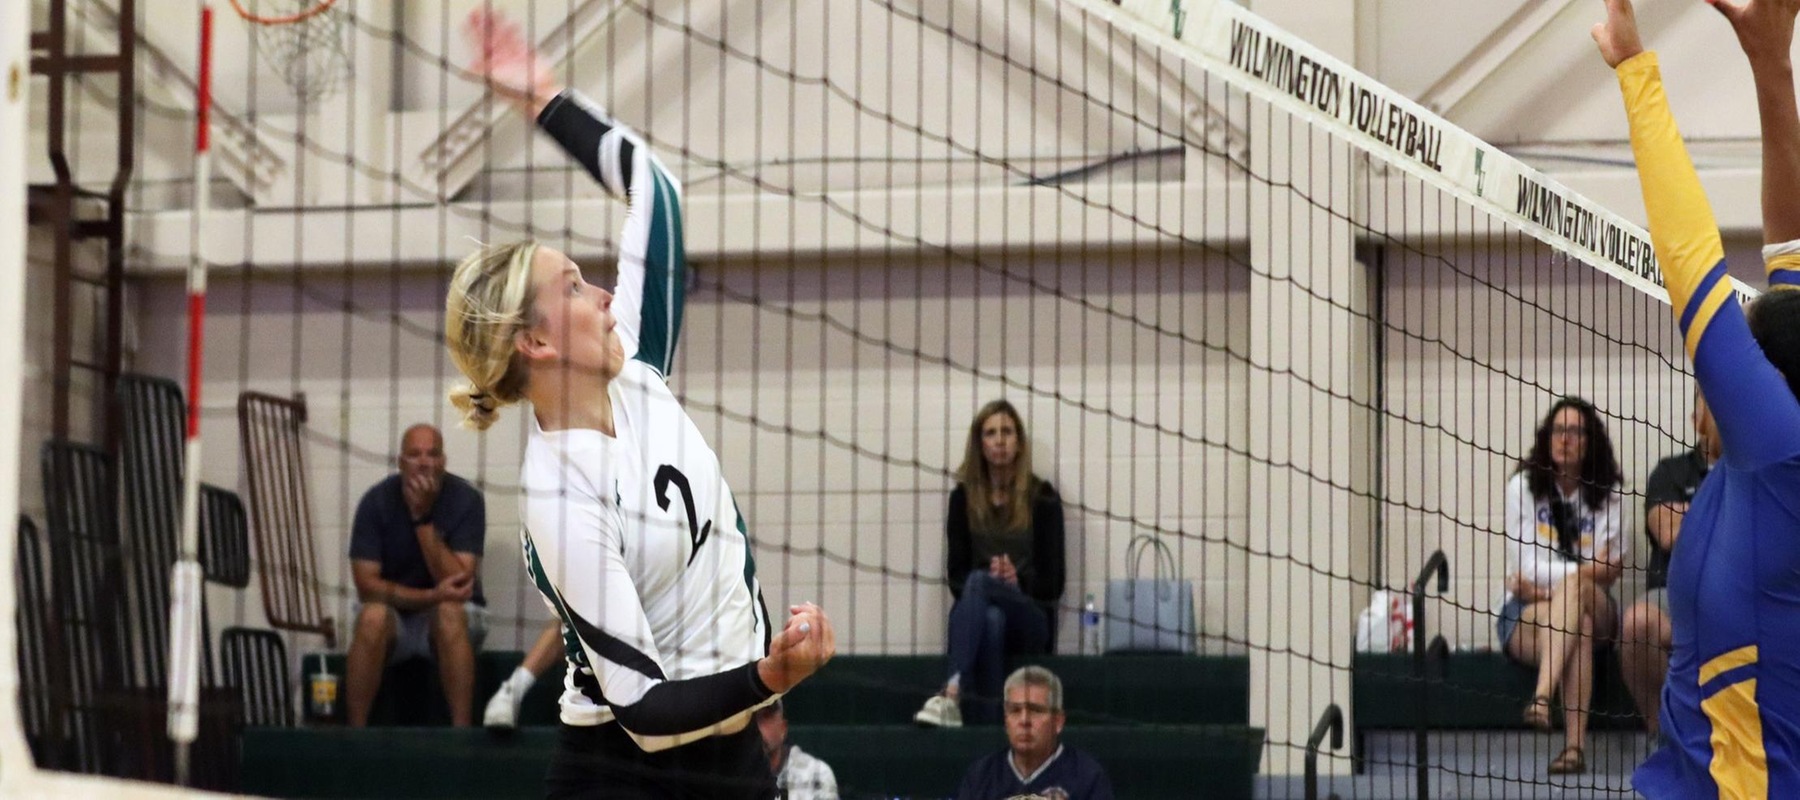 File photo of Heather Pedrick who finished with 13 kills and 29 digs against Chestnut Hill. Copyright 2022; Wilmington University. All rights reserved. Photo by Dan Lauletta. September 10, 2022 vs. New Haven.